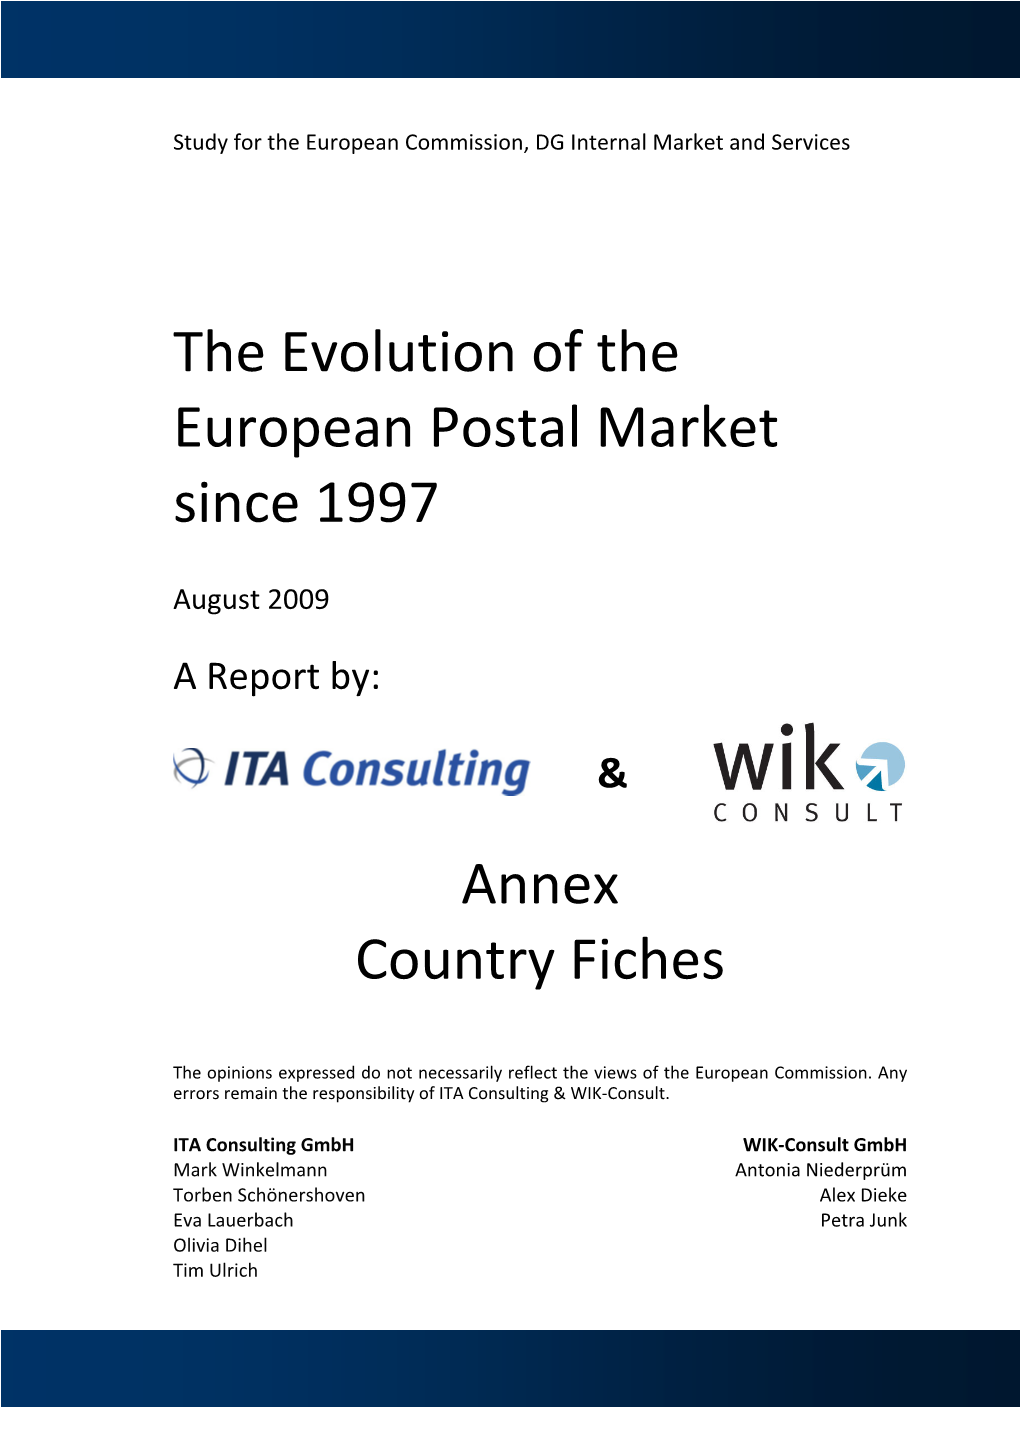 The Evolution of the European Postal Market Since 1997 Annex Country Fiches